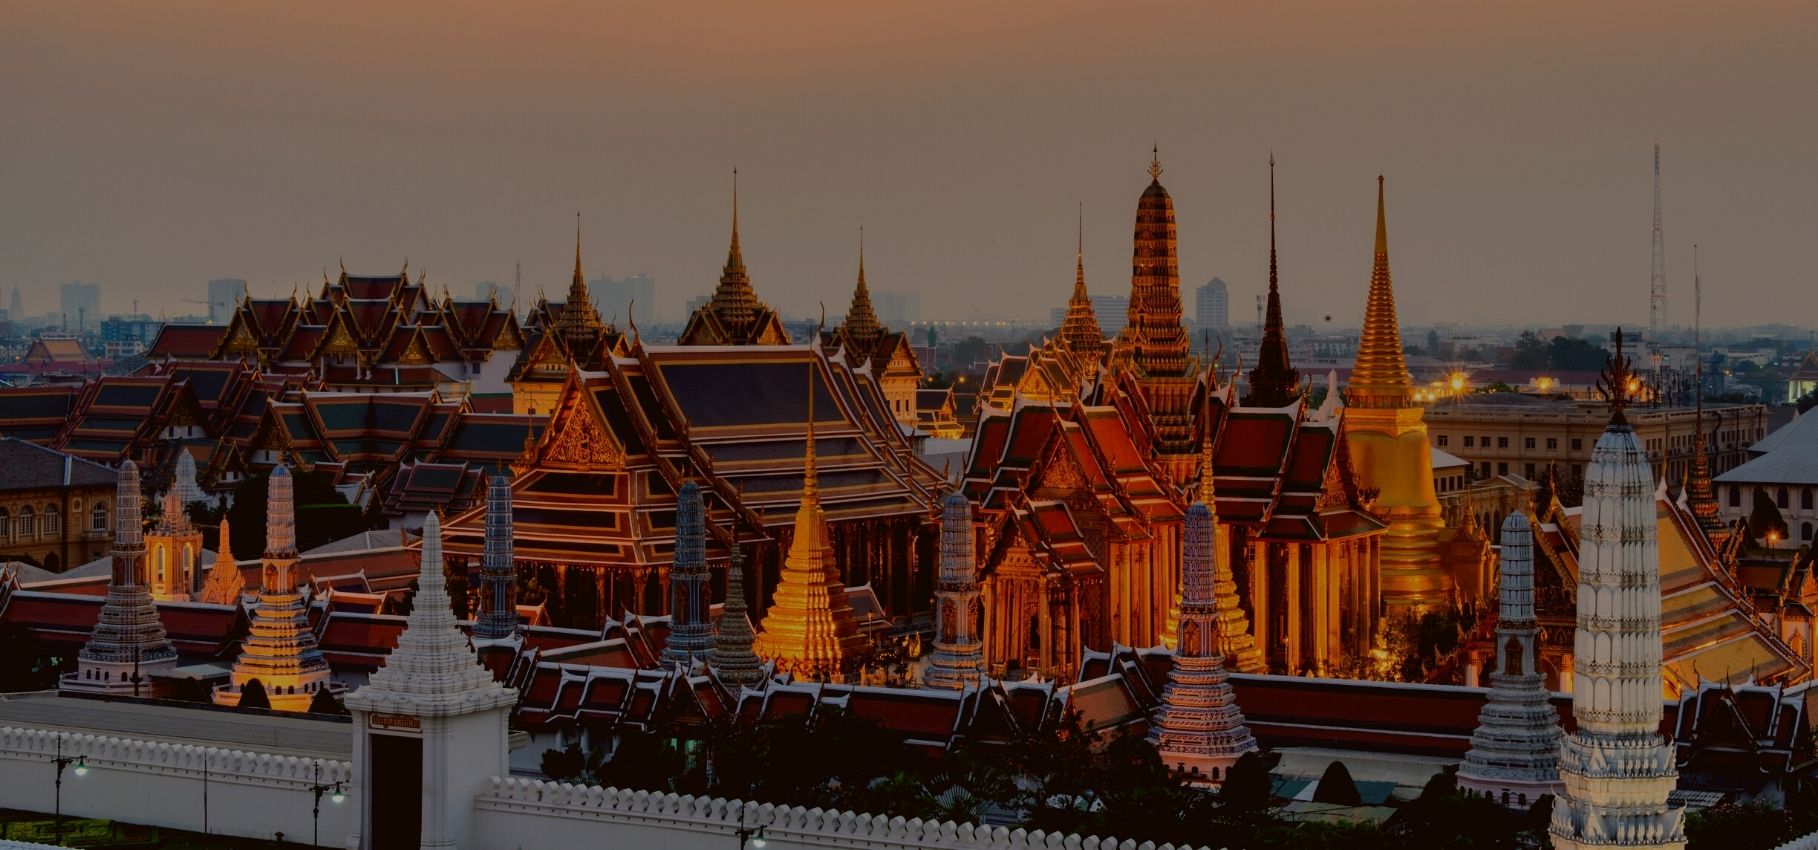 20 Best Bangkok tourist attractions for first time travelers